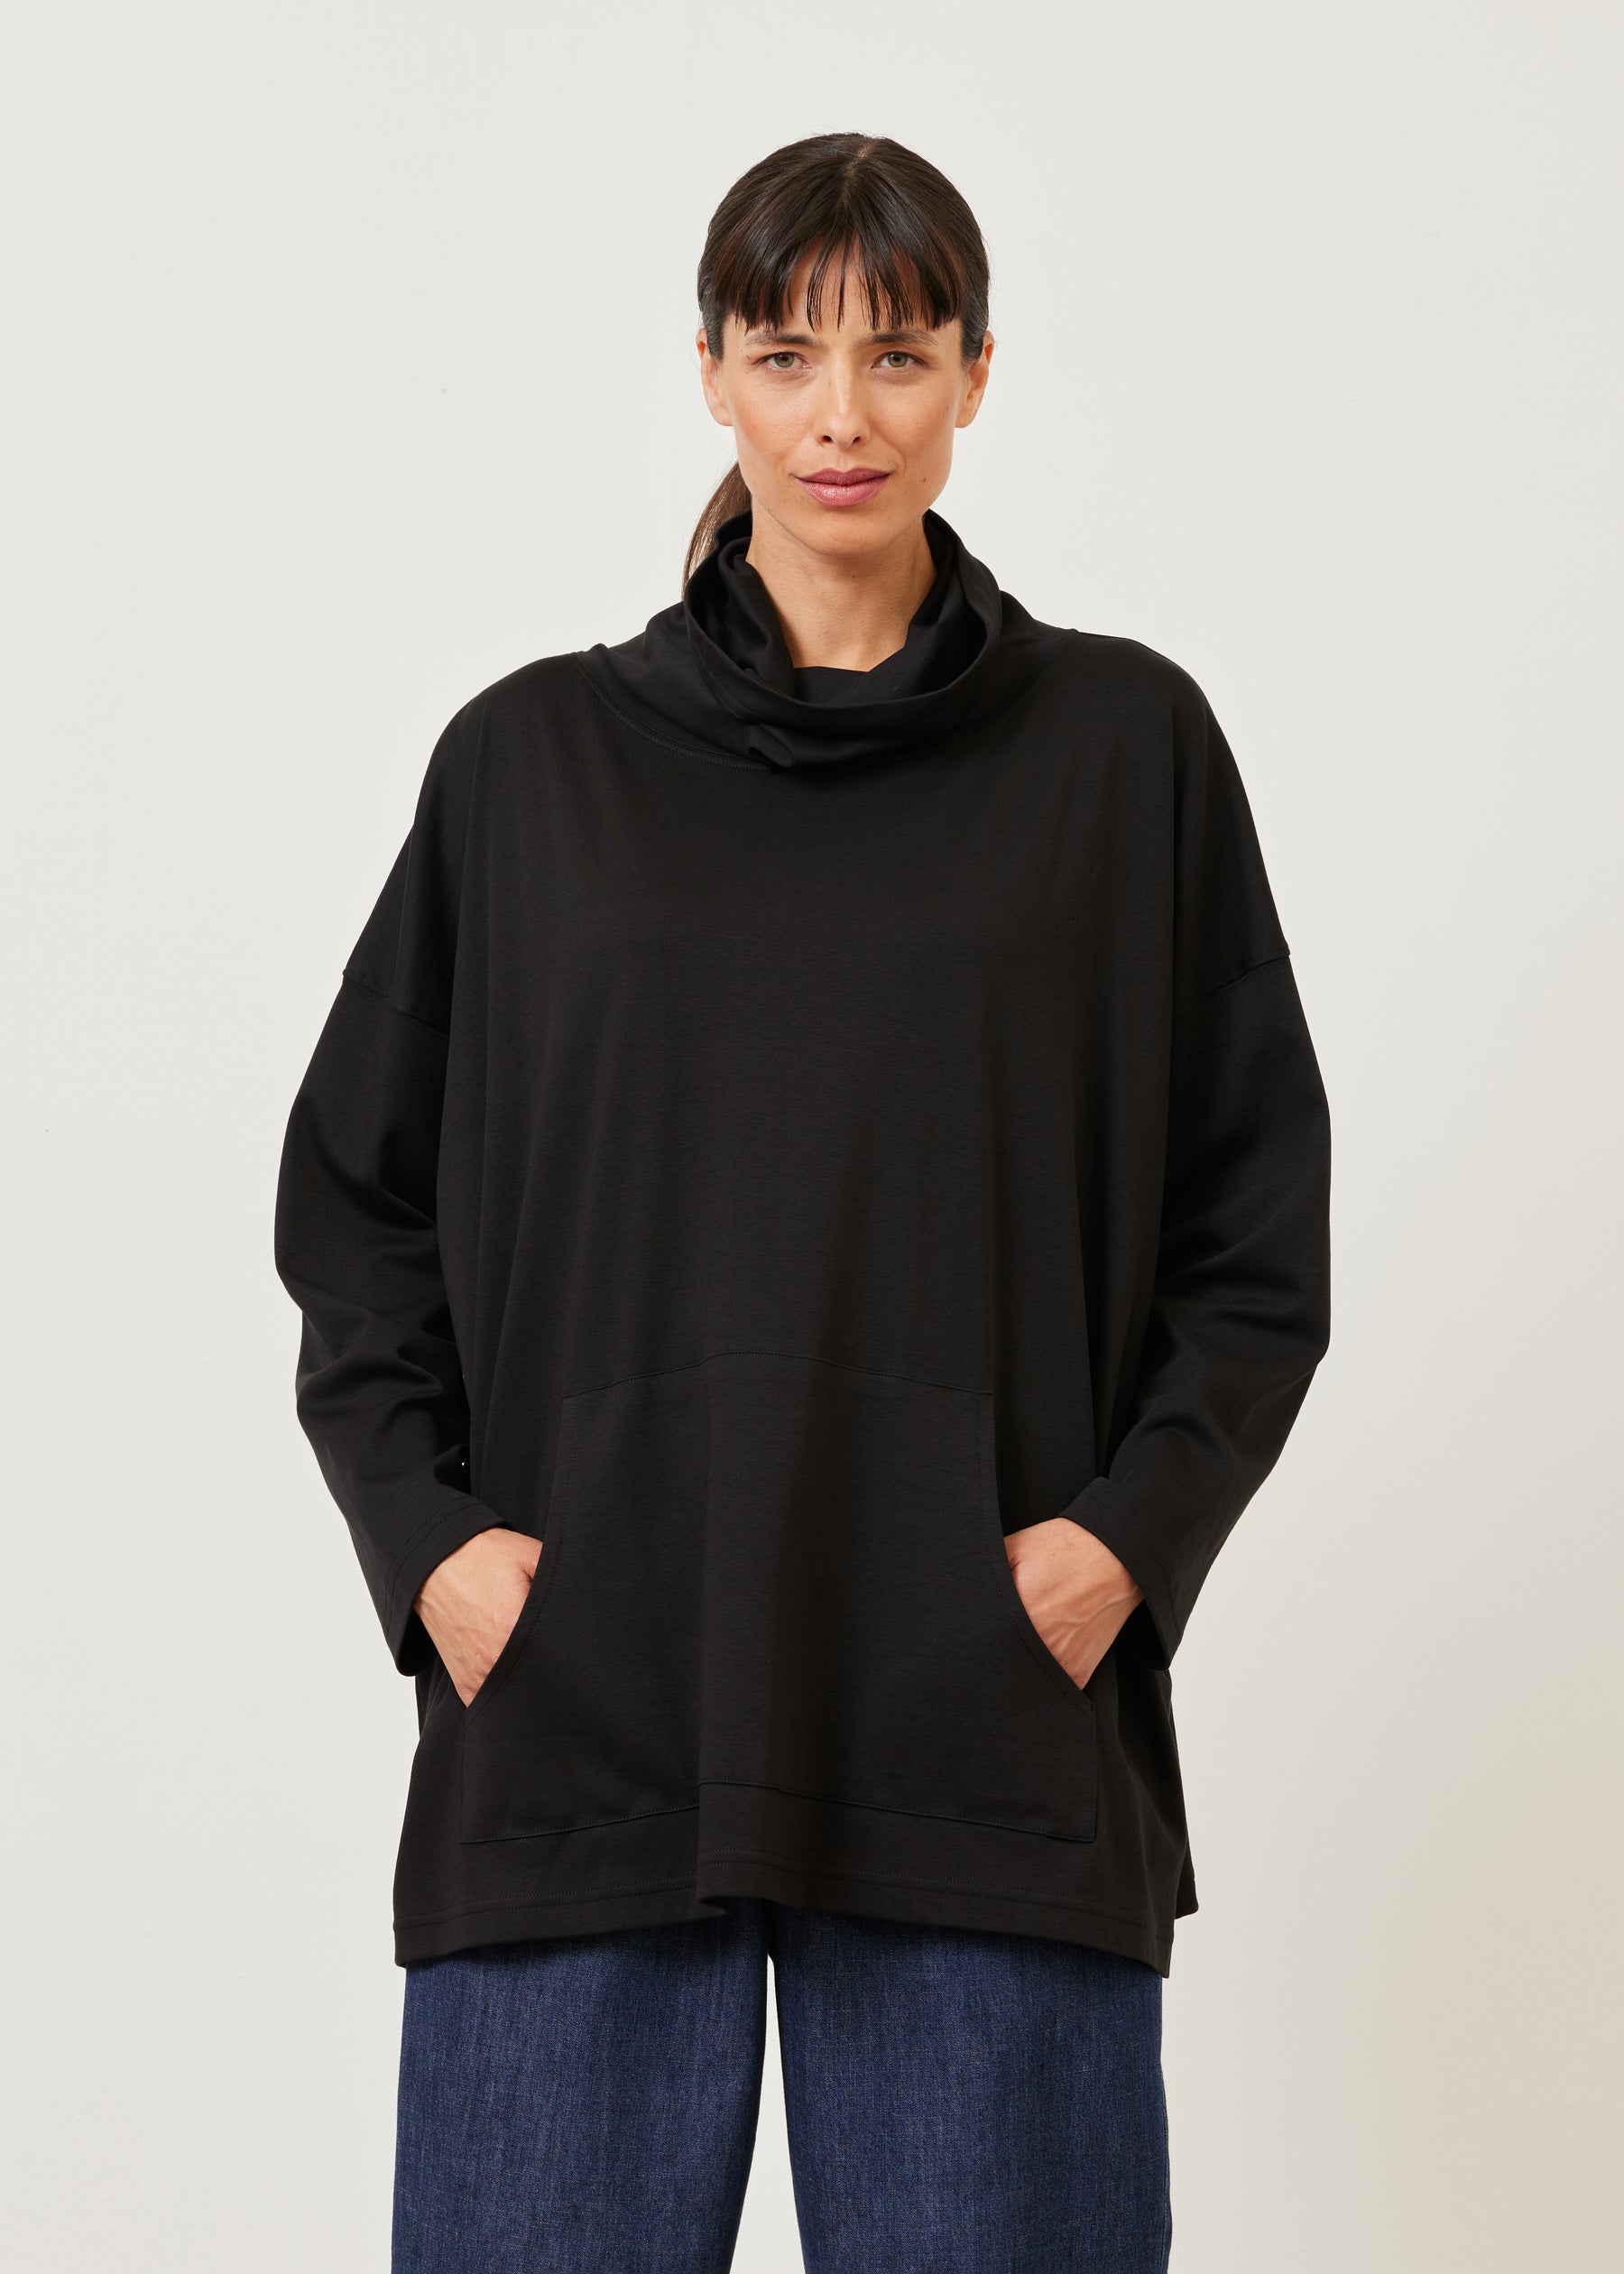 monks top with pouch pocket